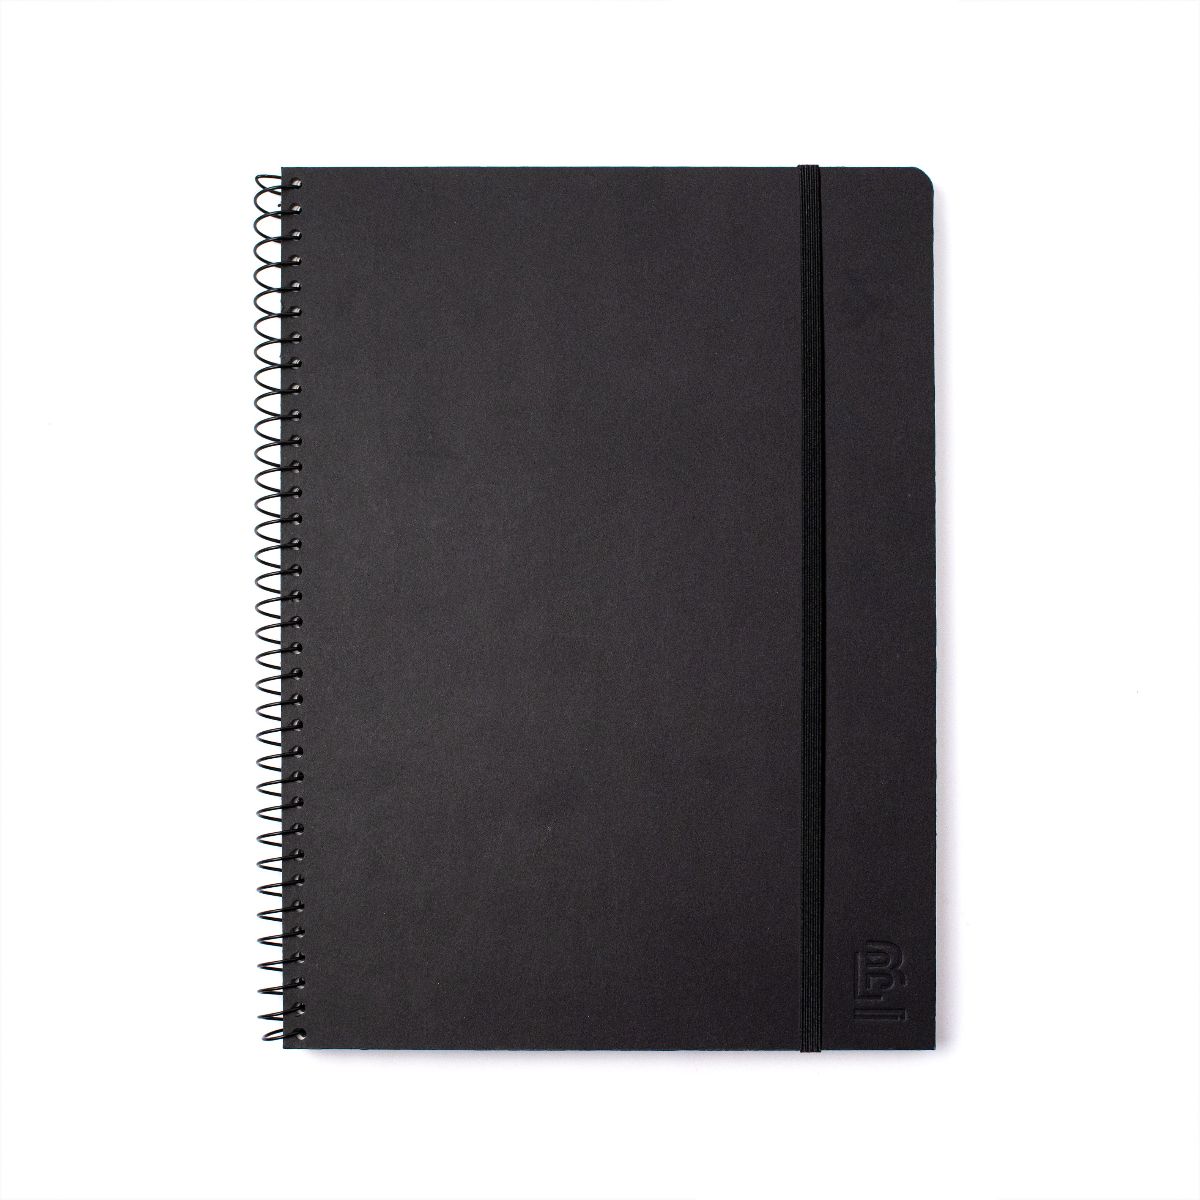 3-in-1 jumbo spiral journal with dotted, lined & blank pages, Five Below